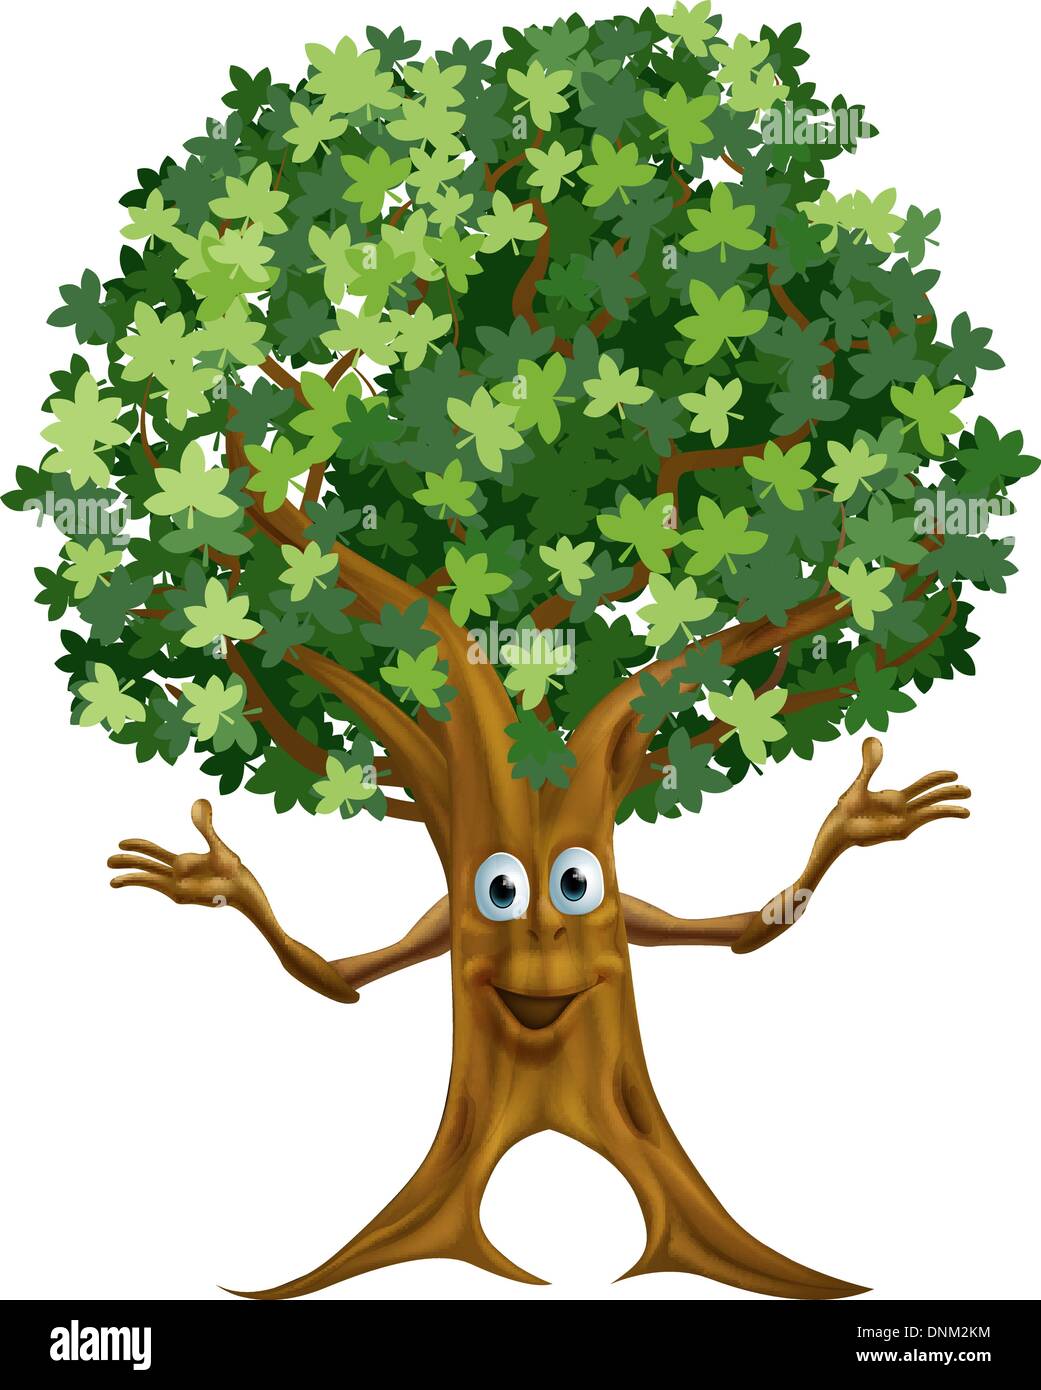 Illustration of a friendly cartoon tree character or mascot Stock Vector  Image & Art - Alamy